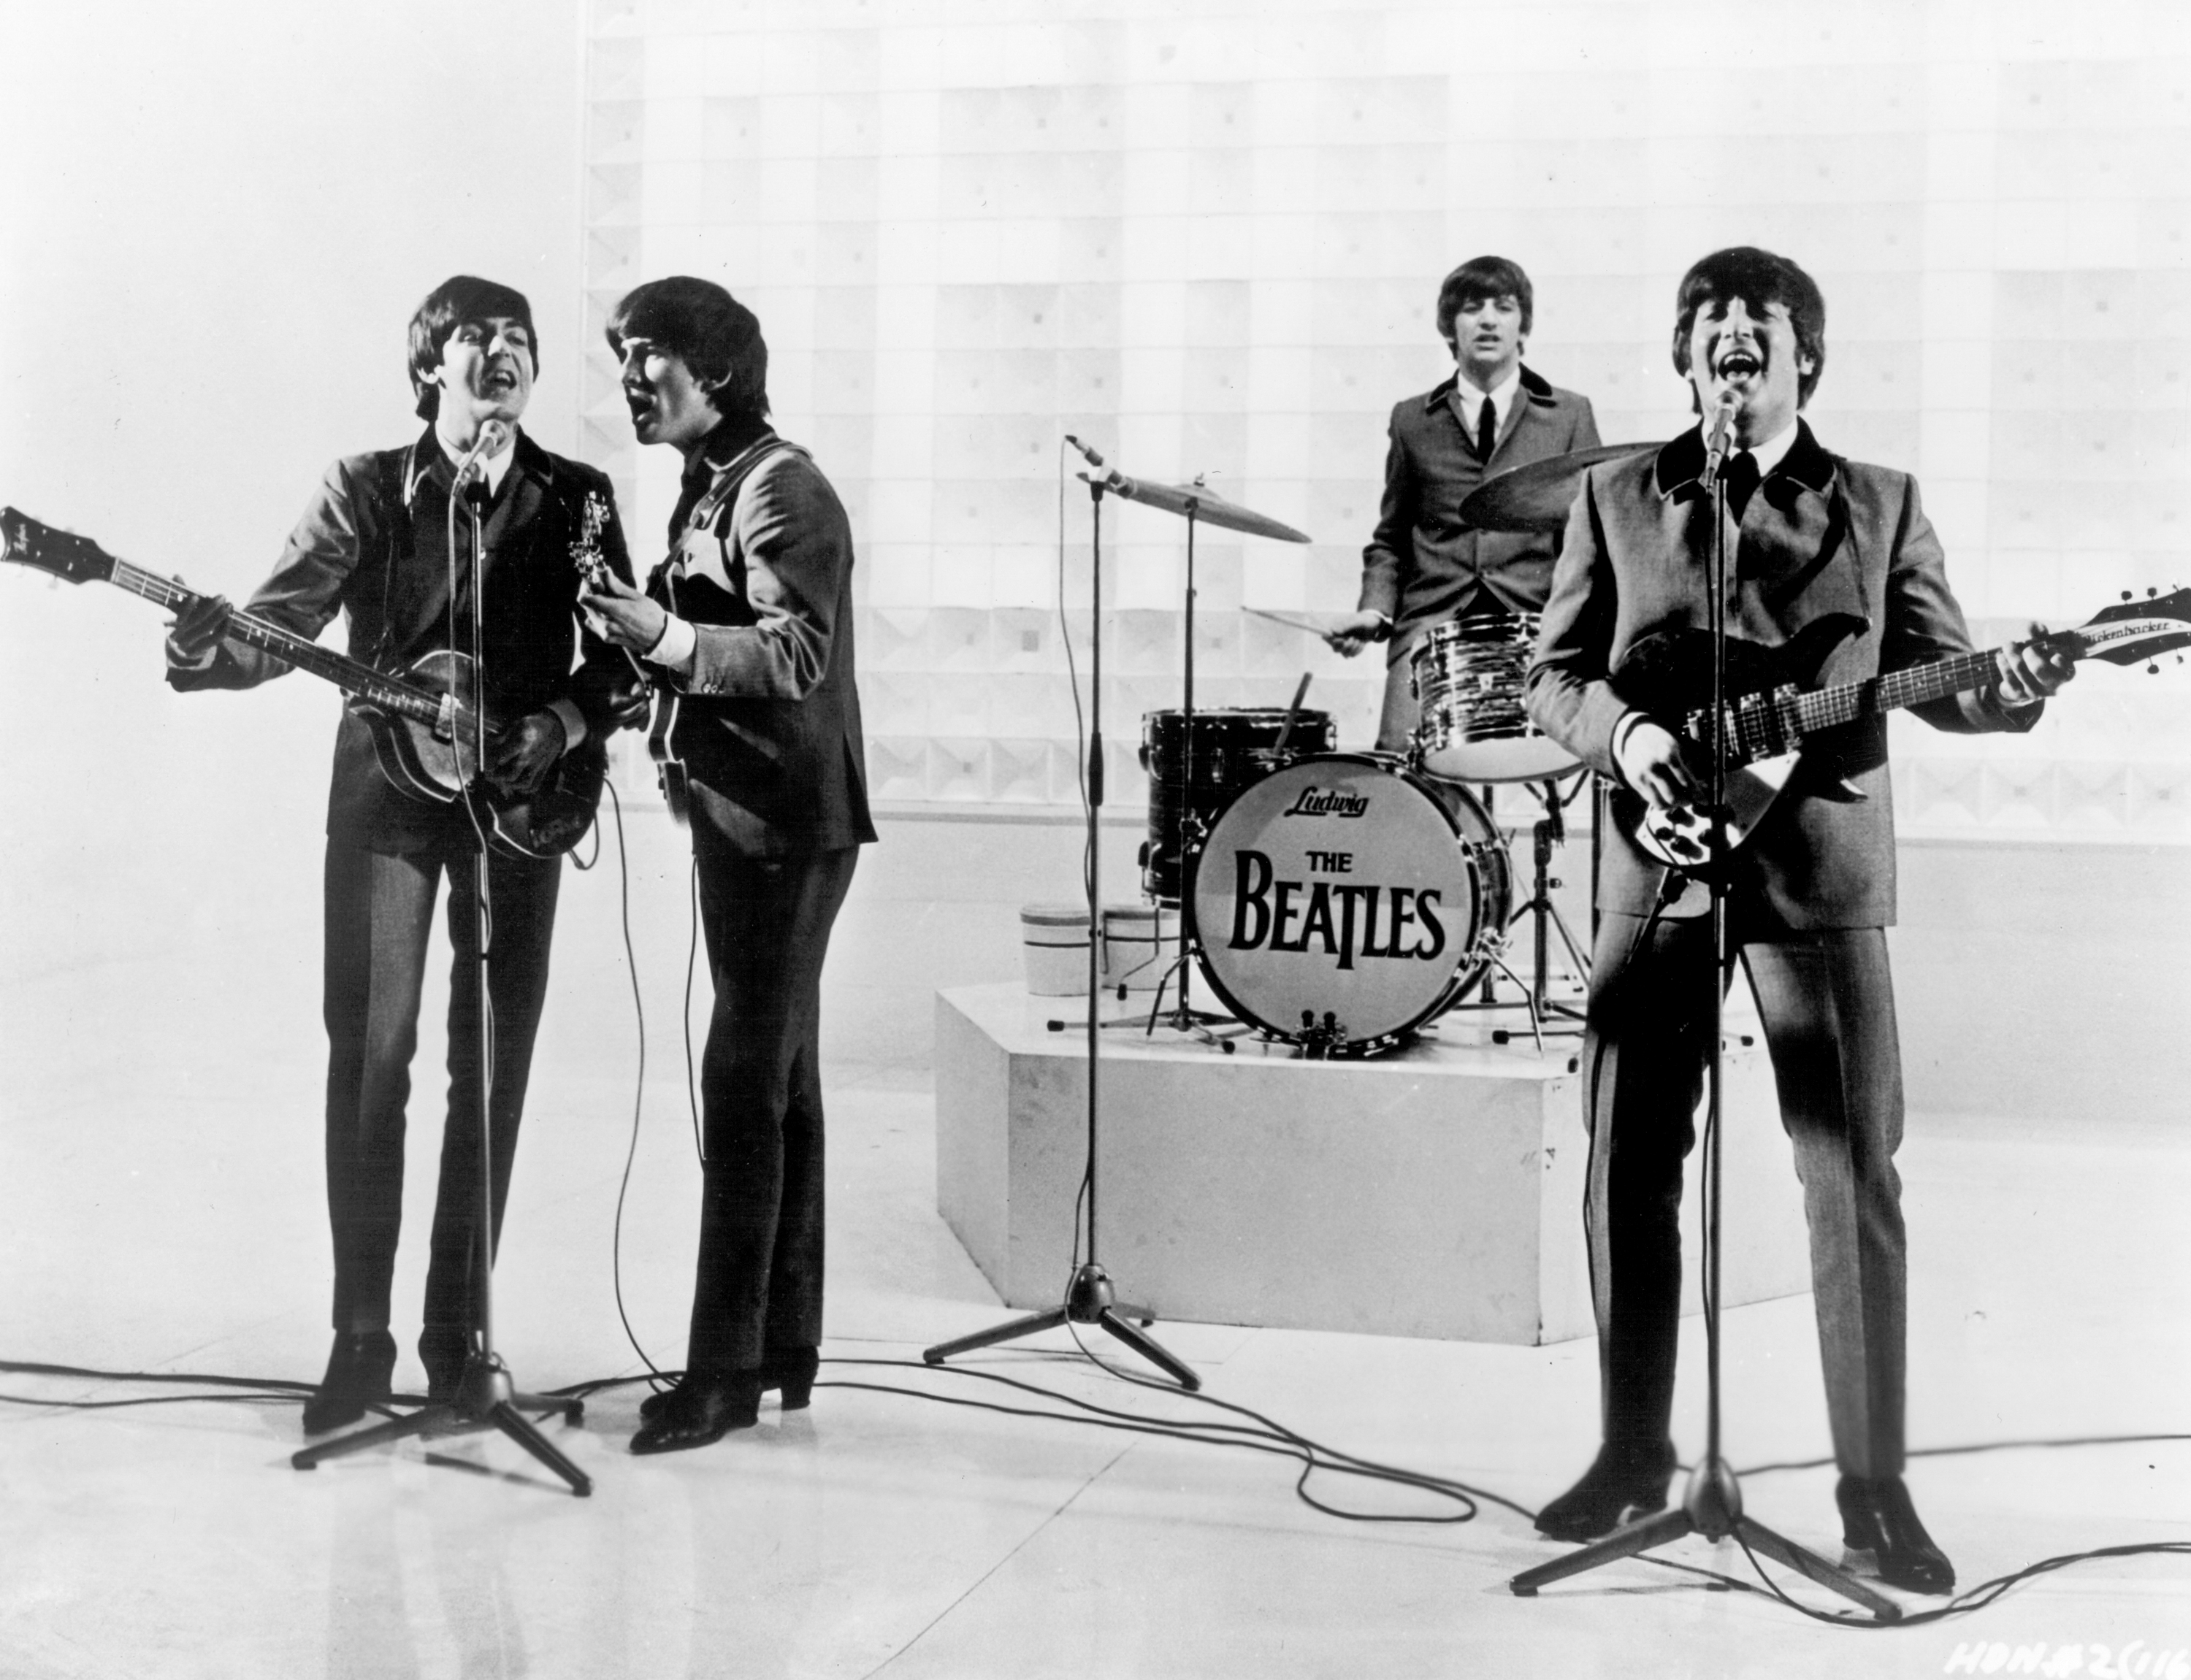 The Beatles with mop tops